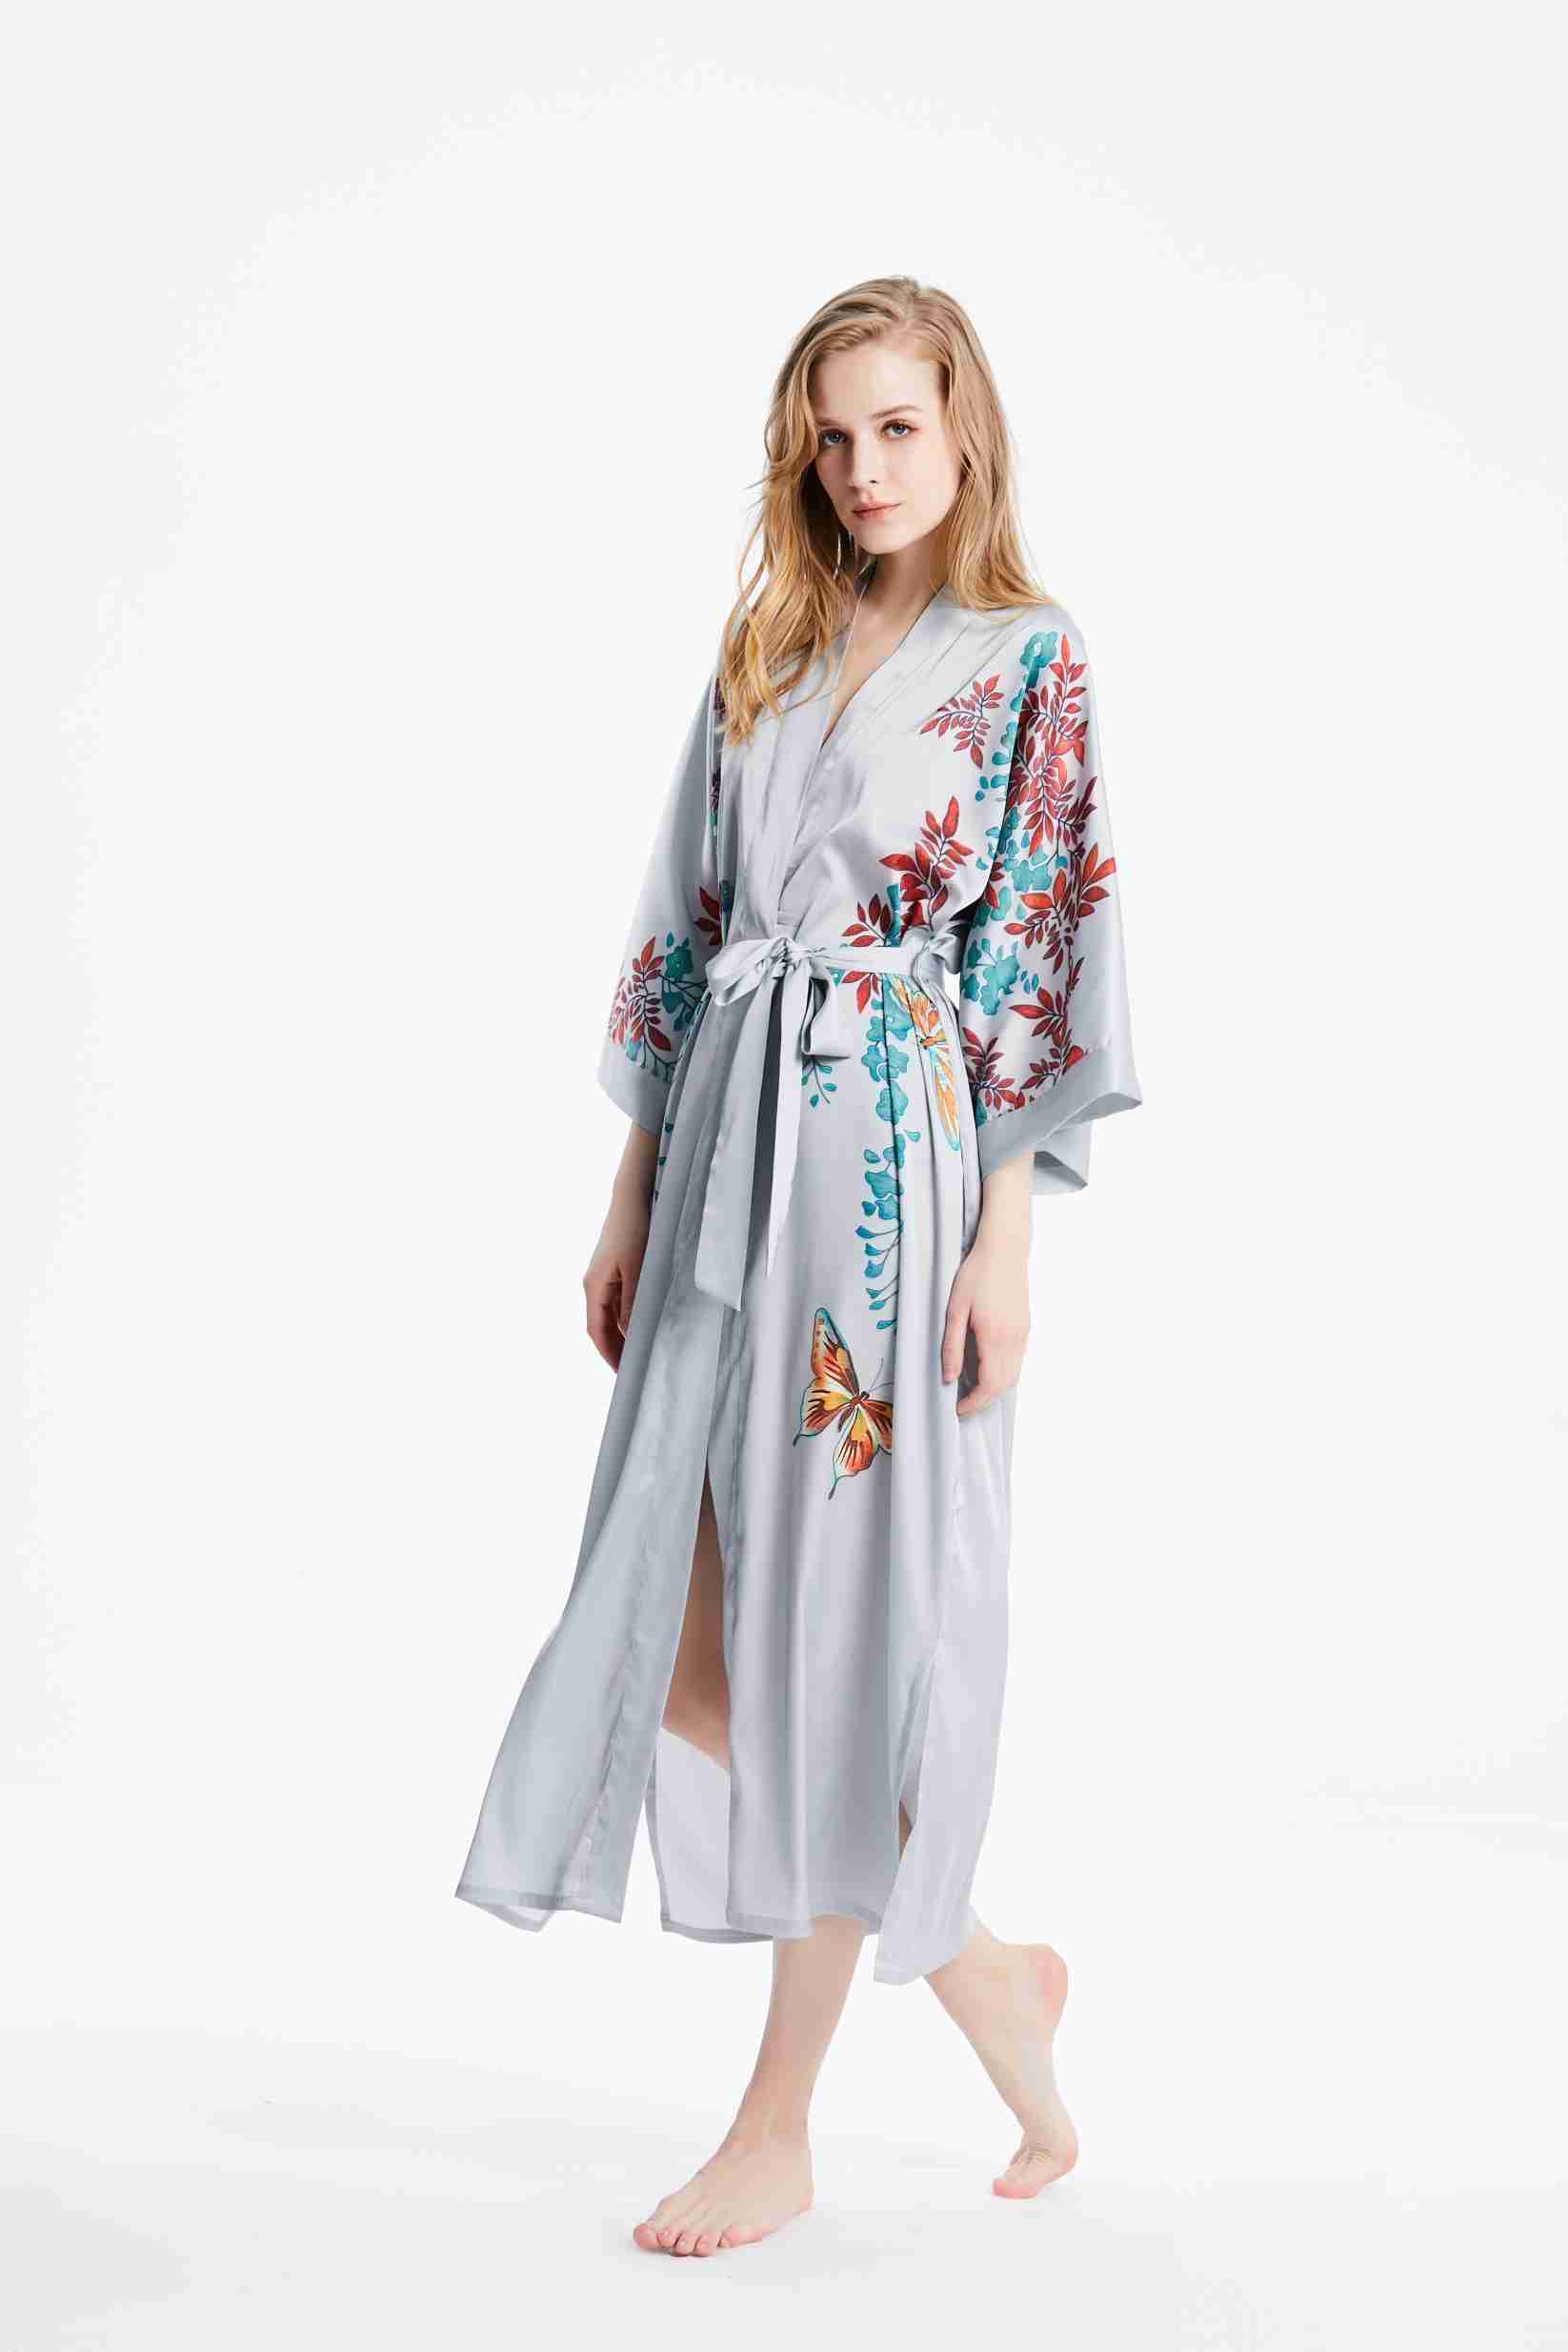 Best Ladies Long Authentic Silk Gray Kimono Robe Nightgown with Custom Floral Print Factory Wholesale